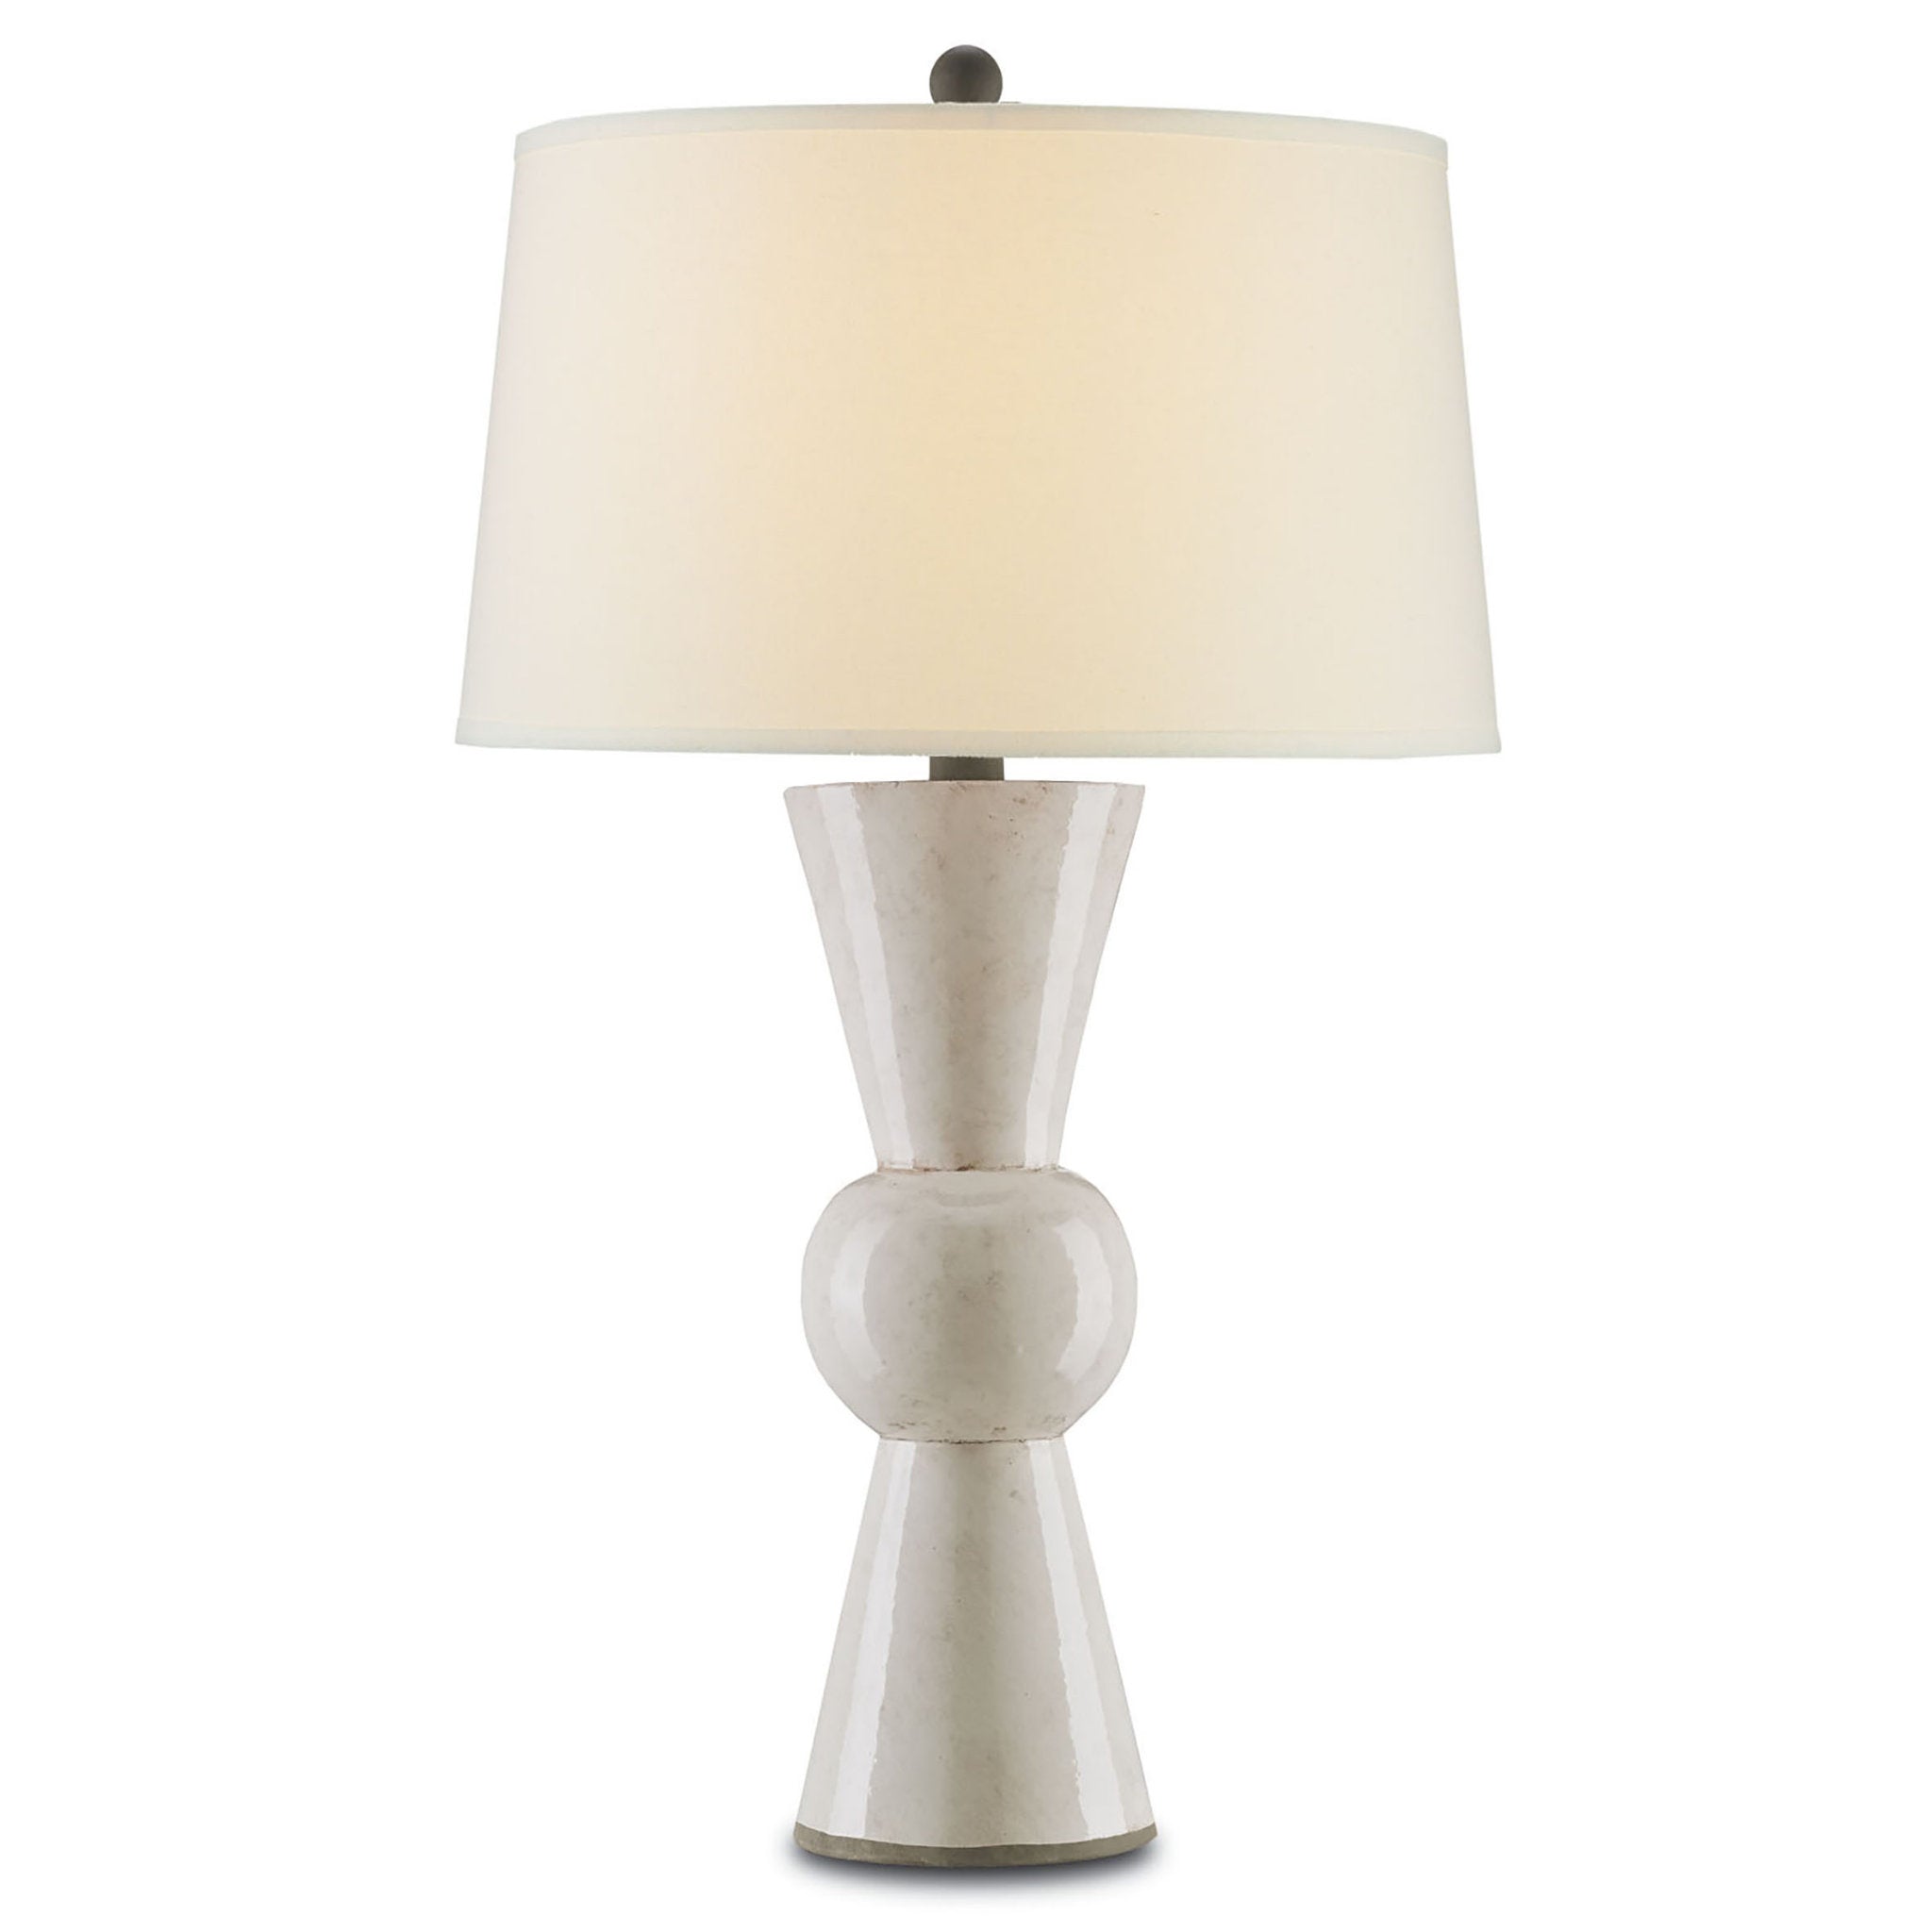 Upbeat White Table Lamp - Antique White